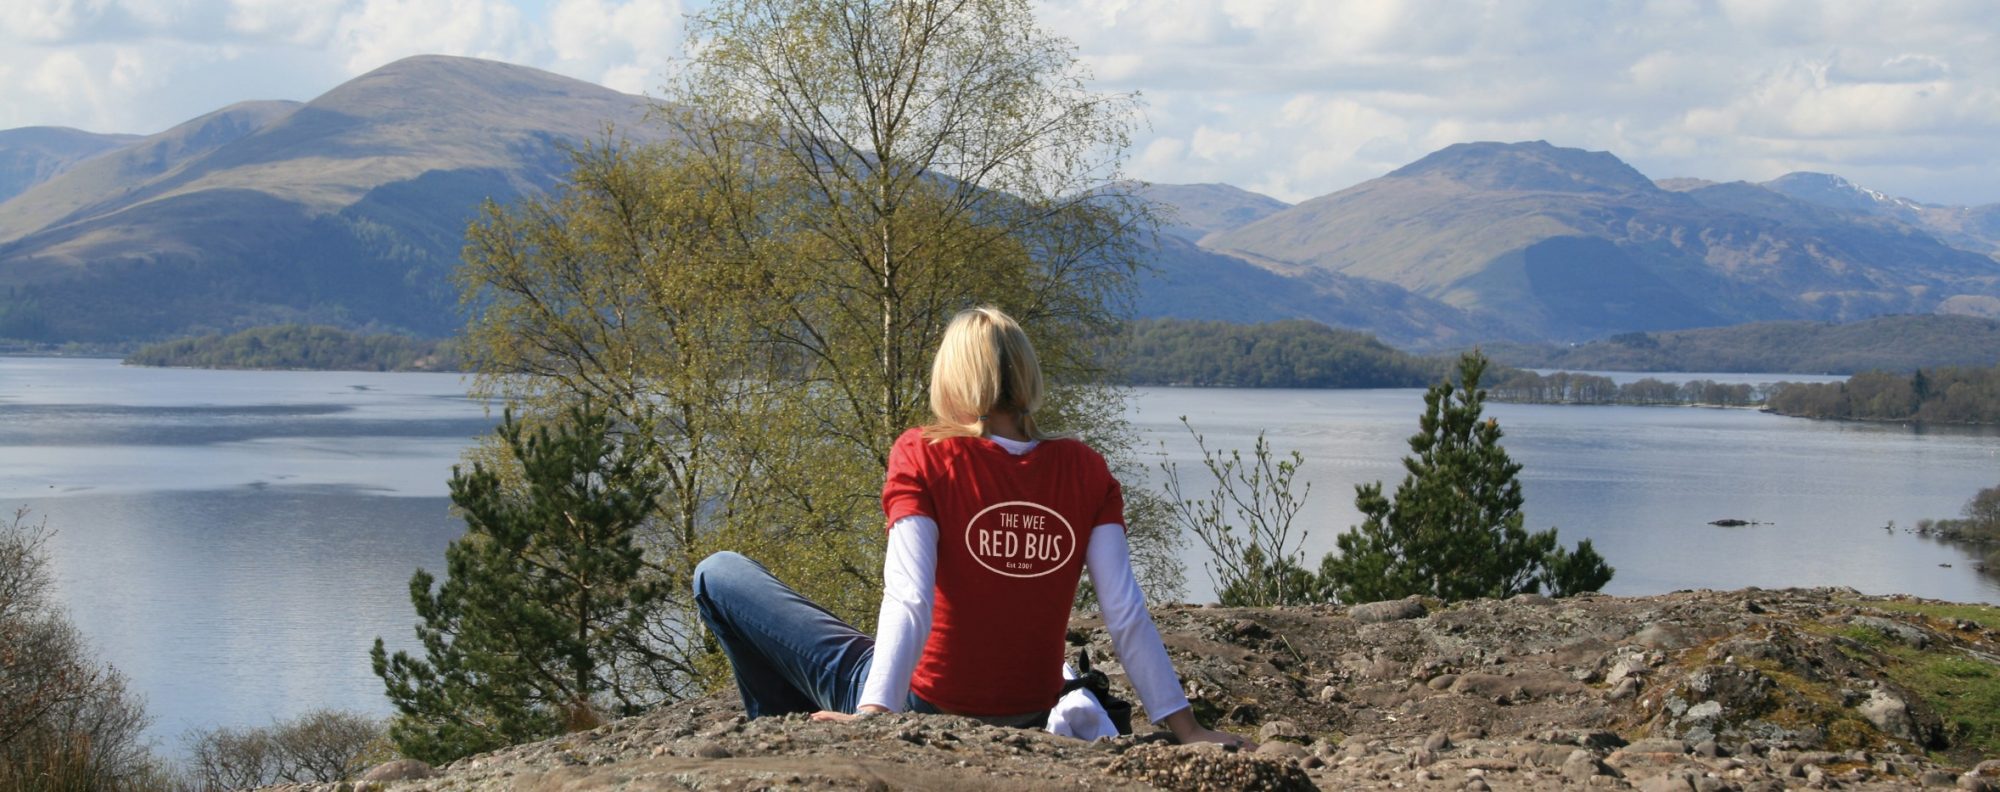 Nicki At Loch Lomond With Host T Shirt Cropped